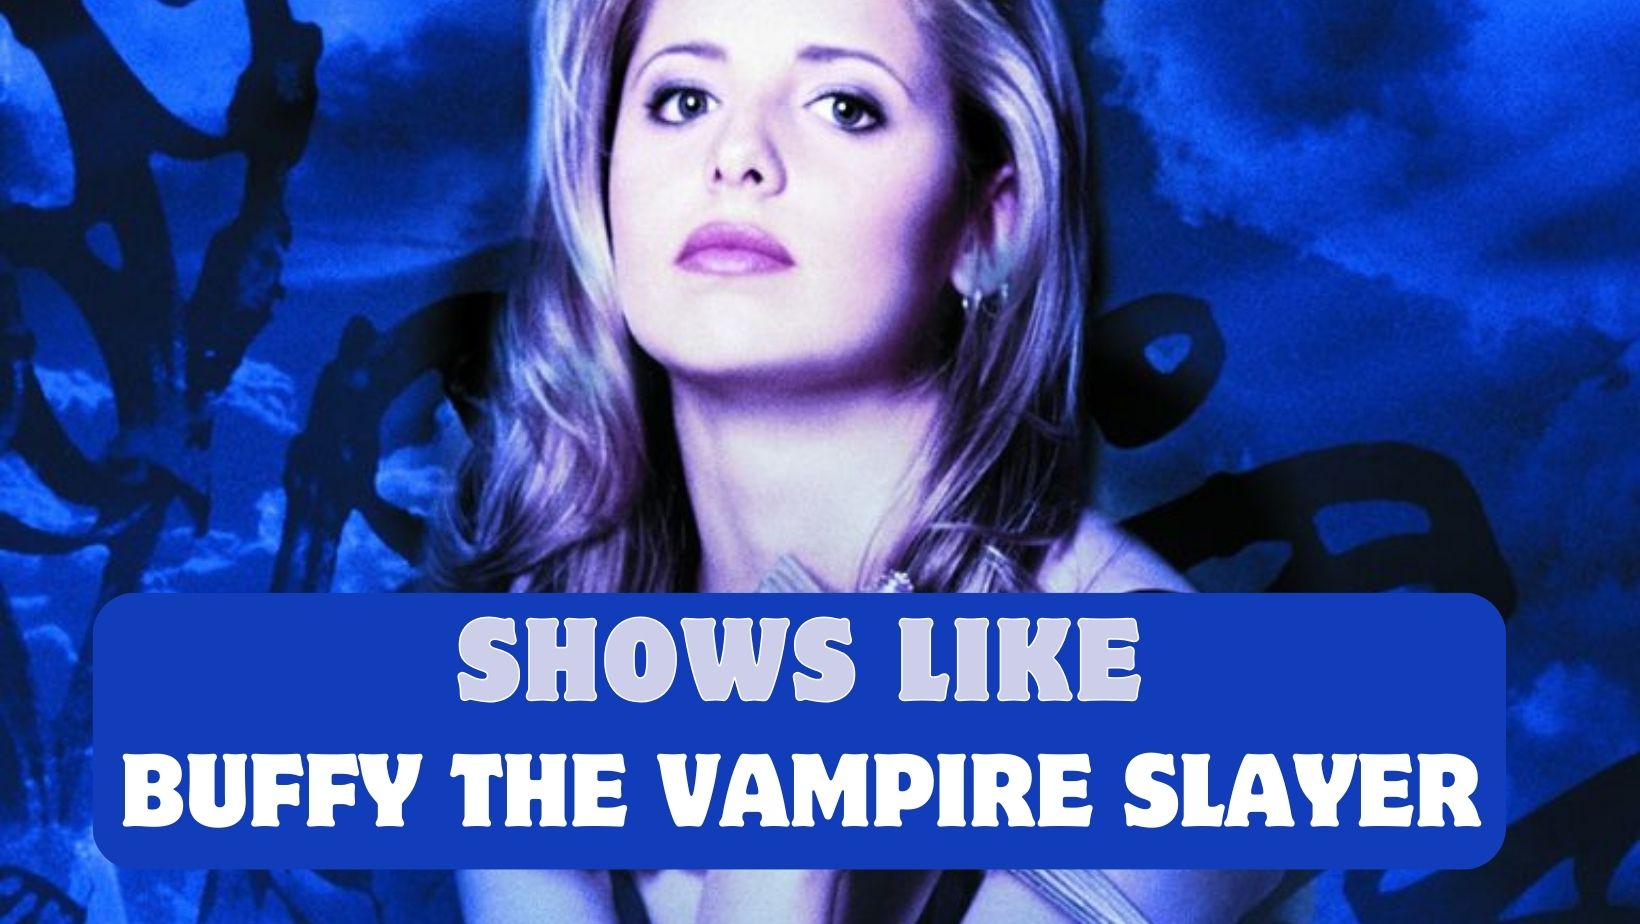 image of buffy with cool blue background with text "Shows Like Buffy The Vampire Slayer"